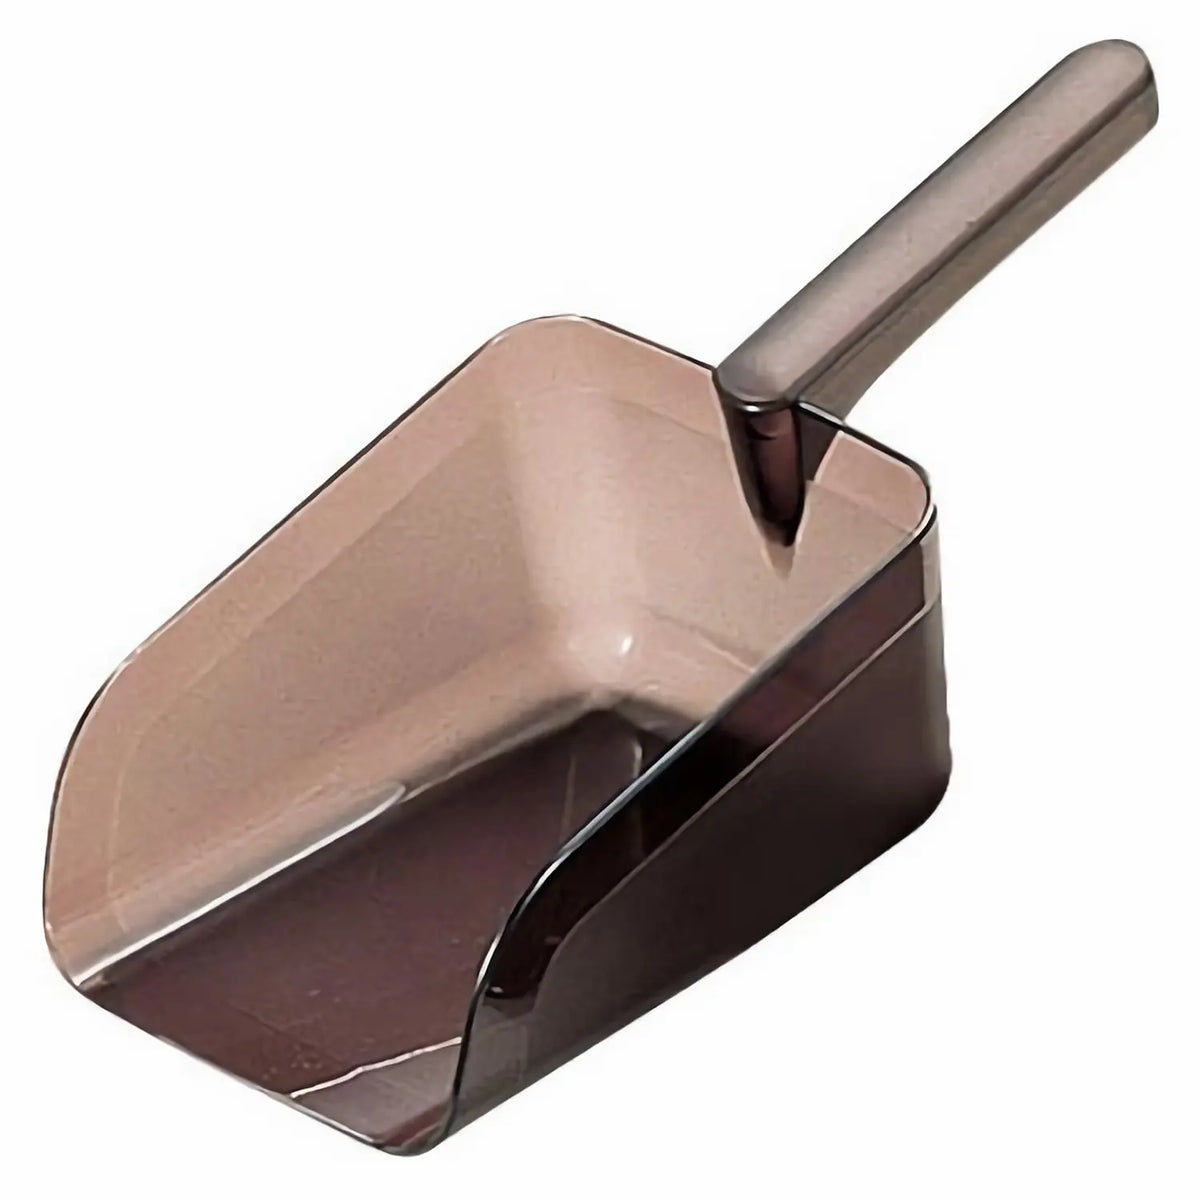 Sampo Sangyo Polycarbonate Ice Scoop Brown